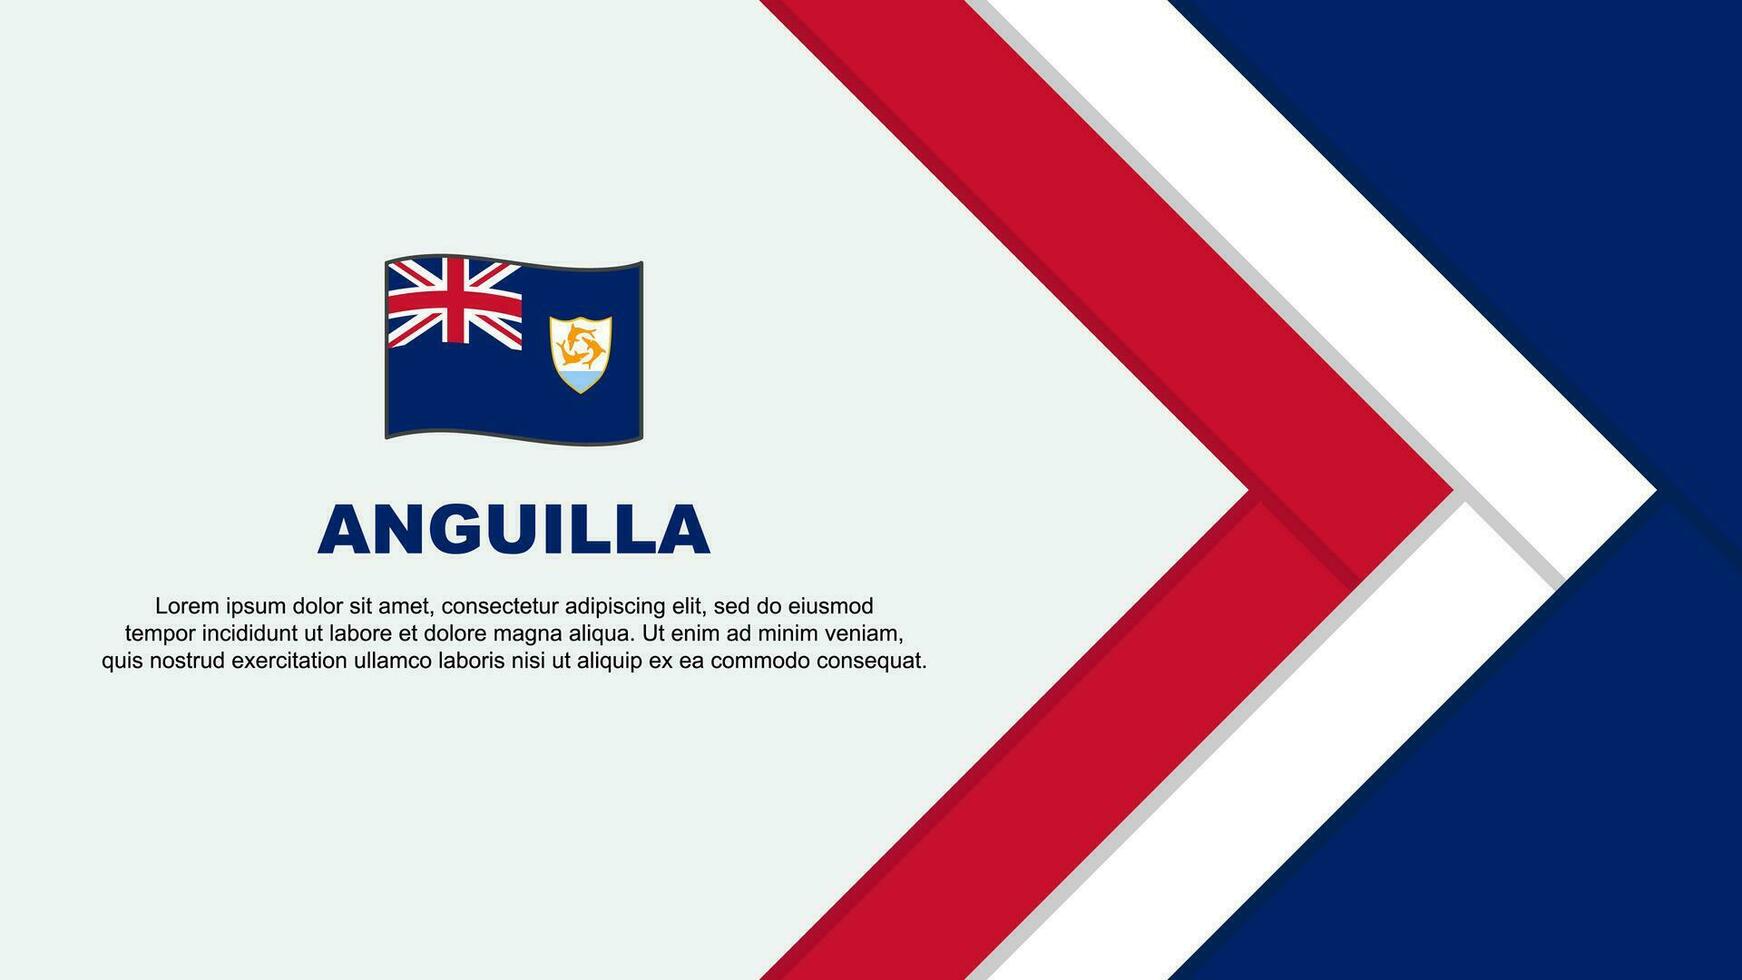 Anguilla Flag Abstract Background Design Template. Anguilla Independence Day Banner Cartoon Vector Illustration. Anguilla Cartoon